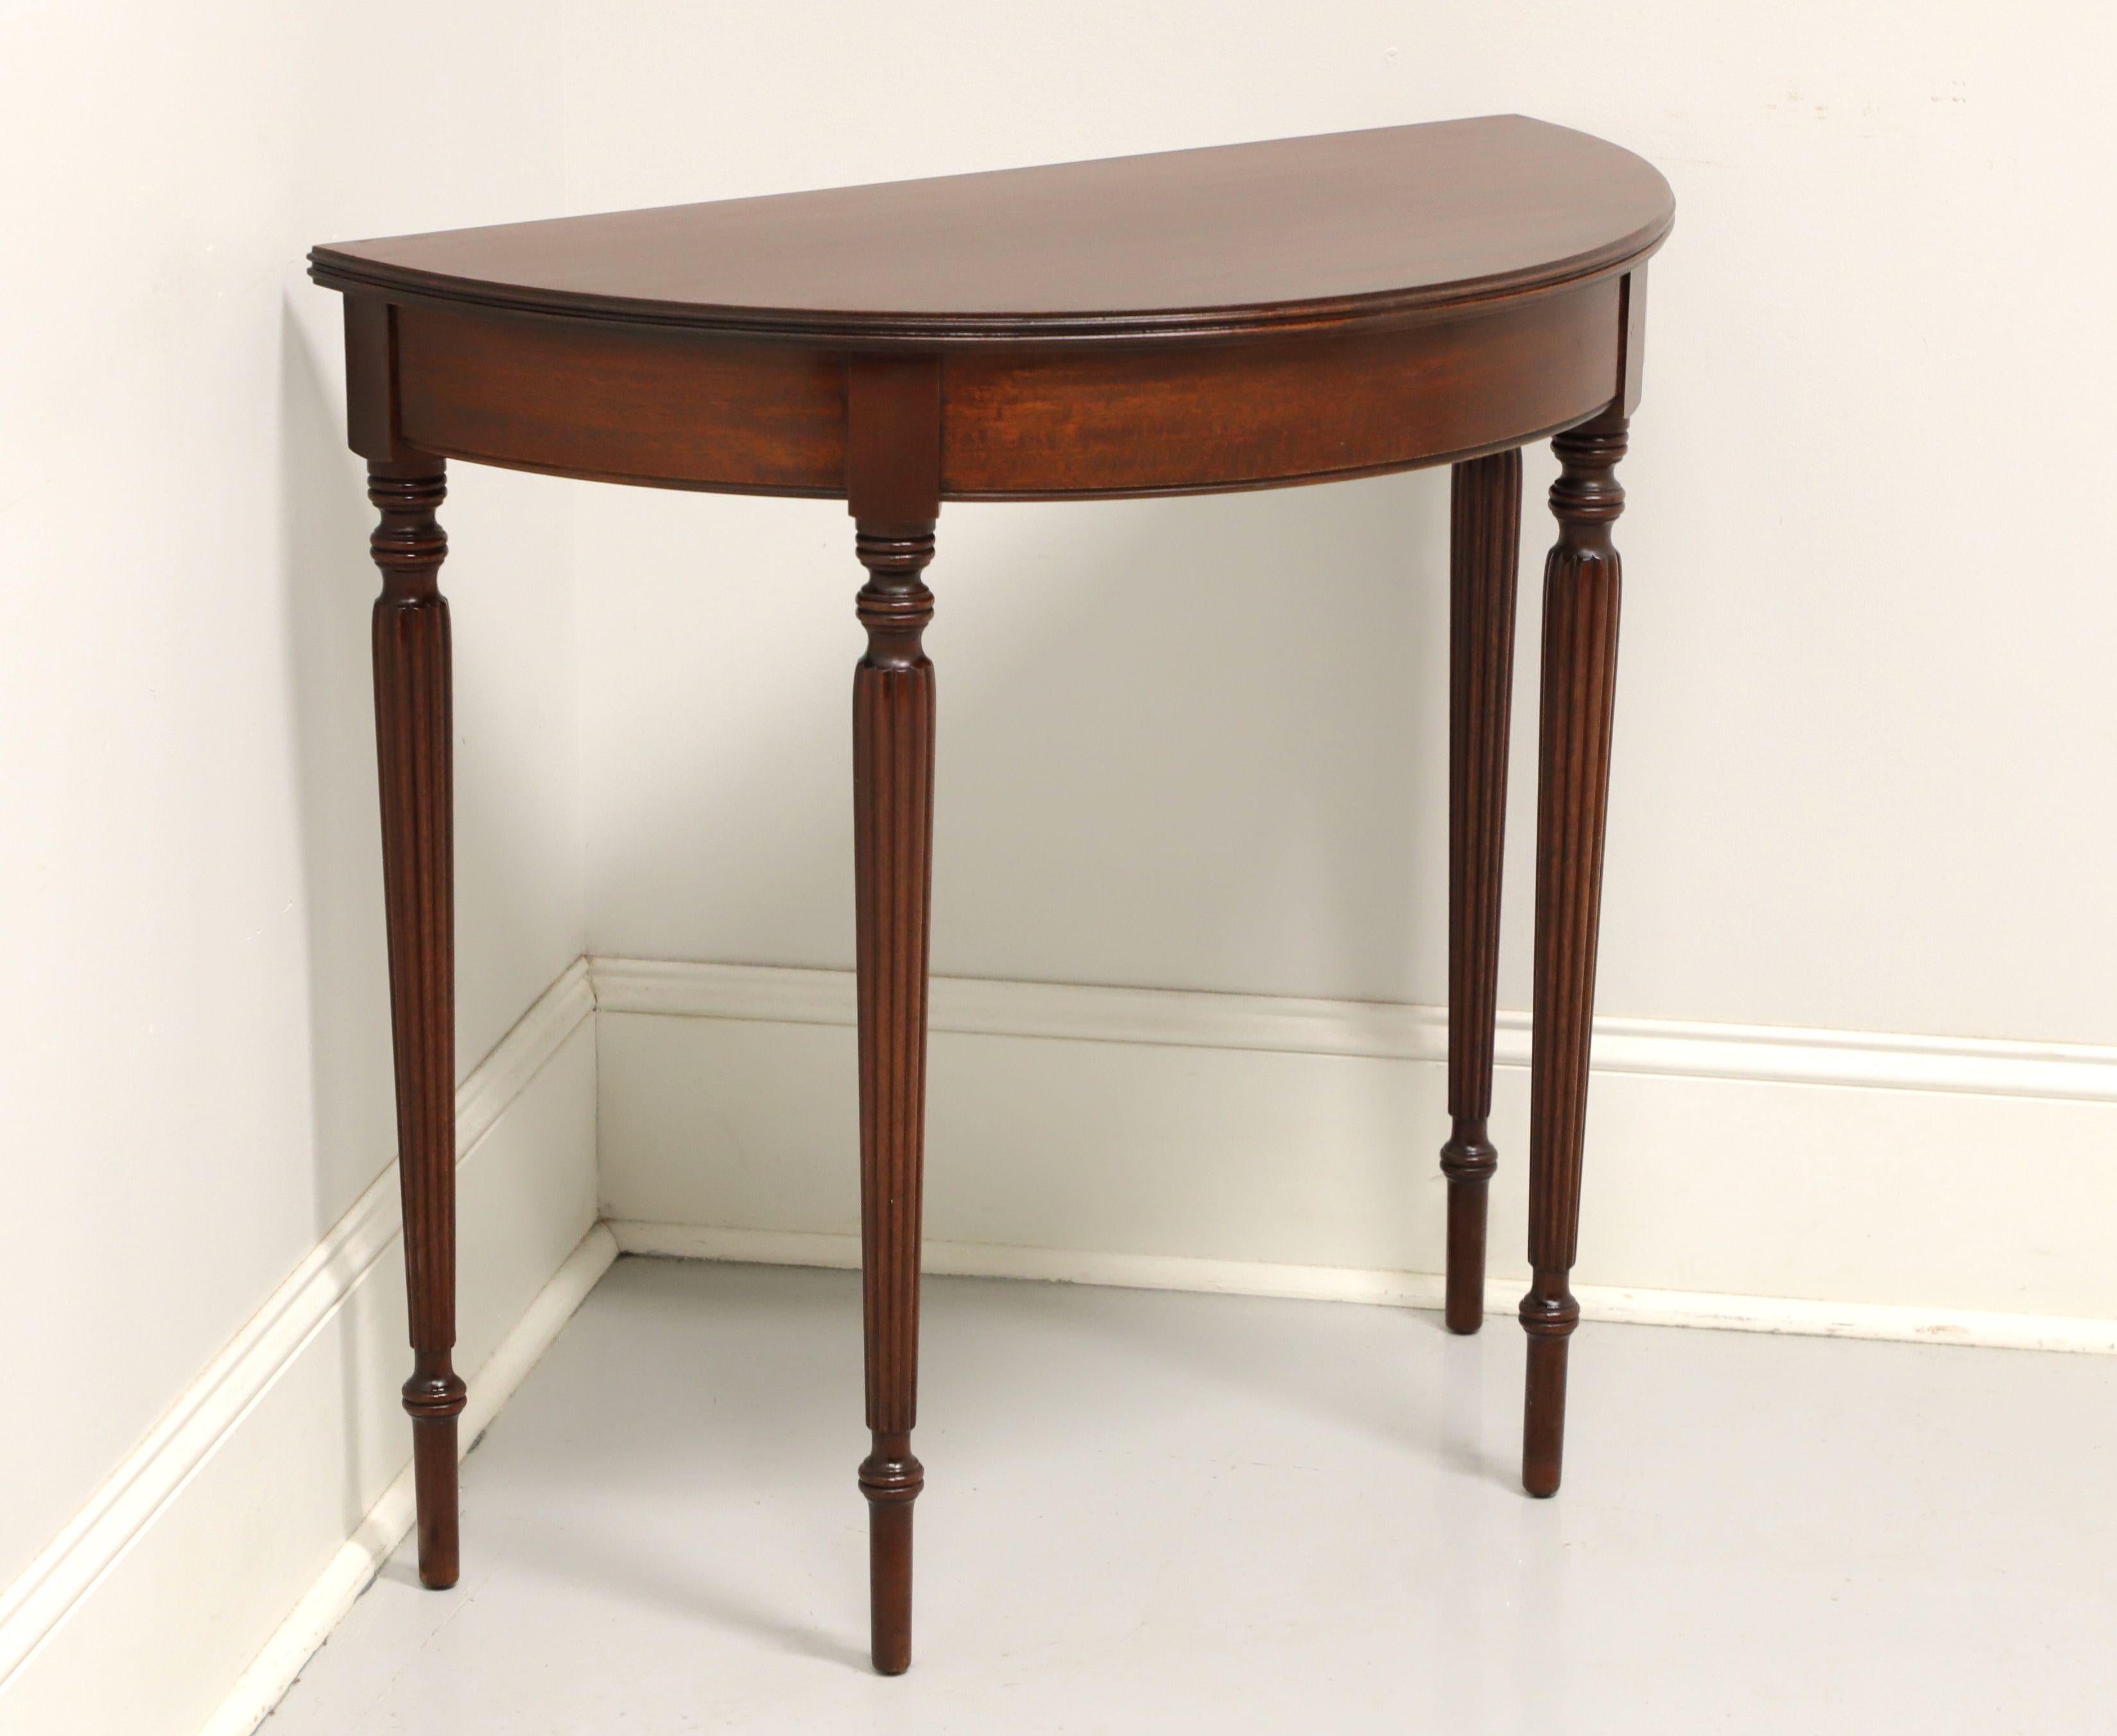 An antique Sheraton style demilune console table by Paine Furniture, of Boston, Massachusetts, USA. Solid mahogany with demilune (half moon) shape, ribbed edge, and fluted legs. Made in the early 20th Century.

Measures: 32W 15.75D